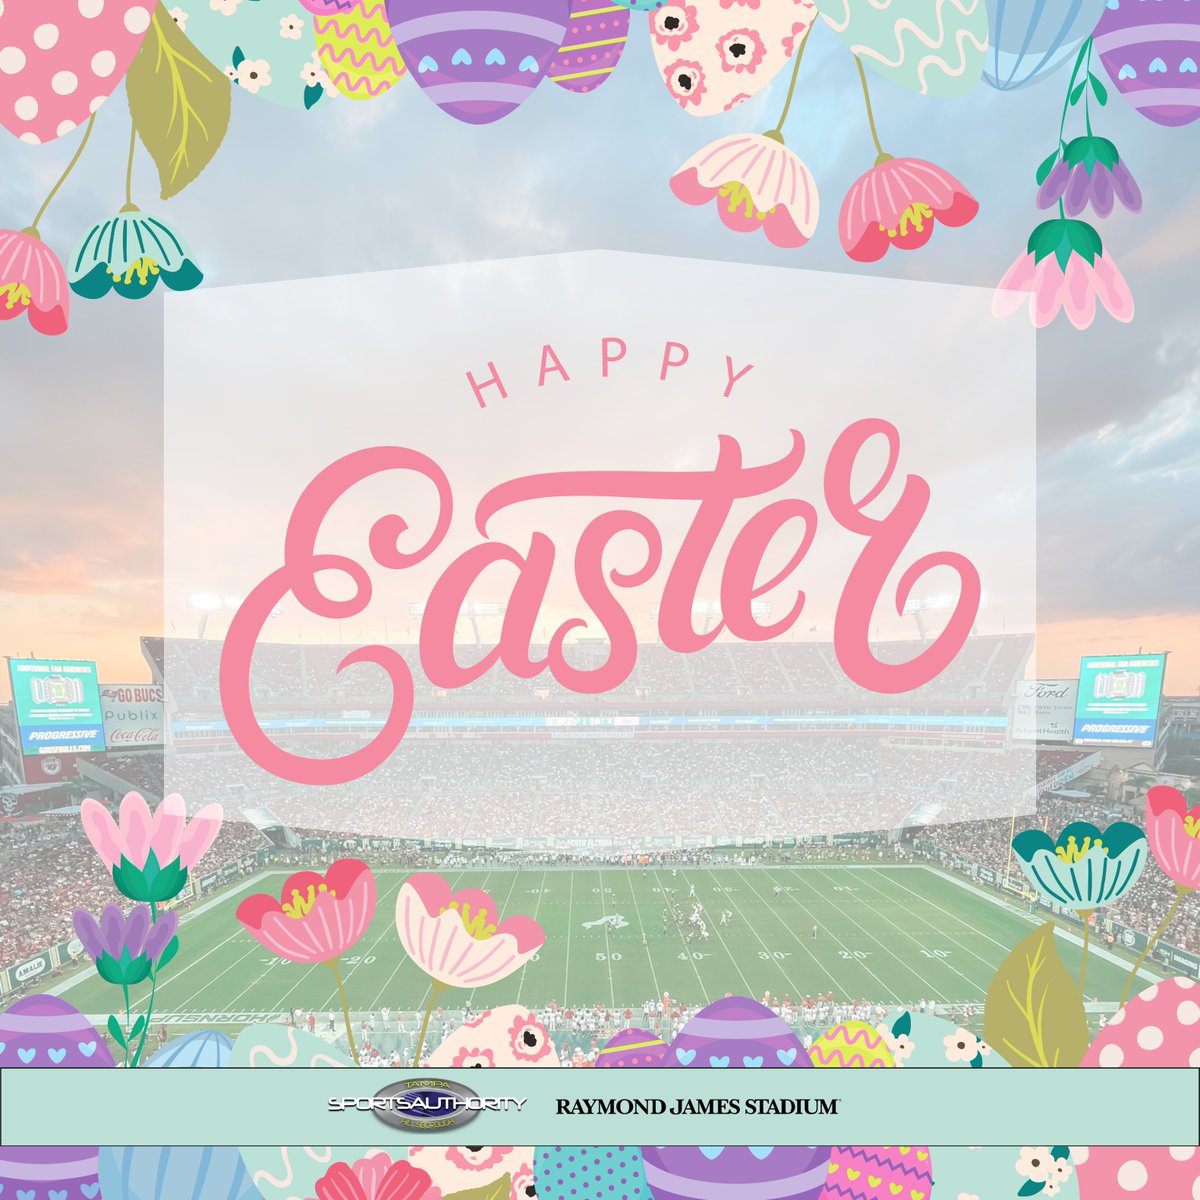 Happy Easter from all of us at Raymond James Stadium!